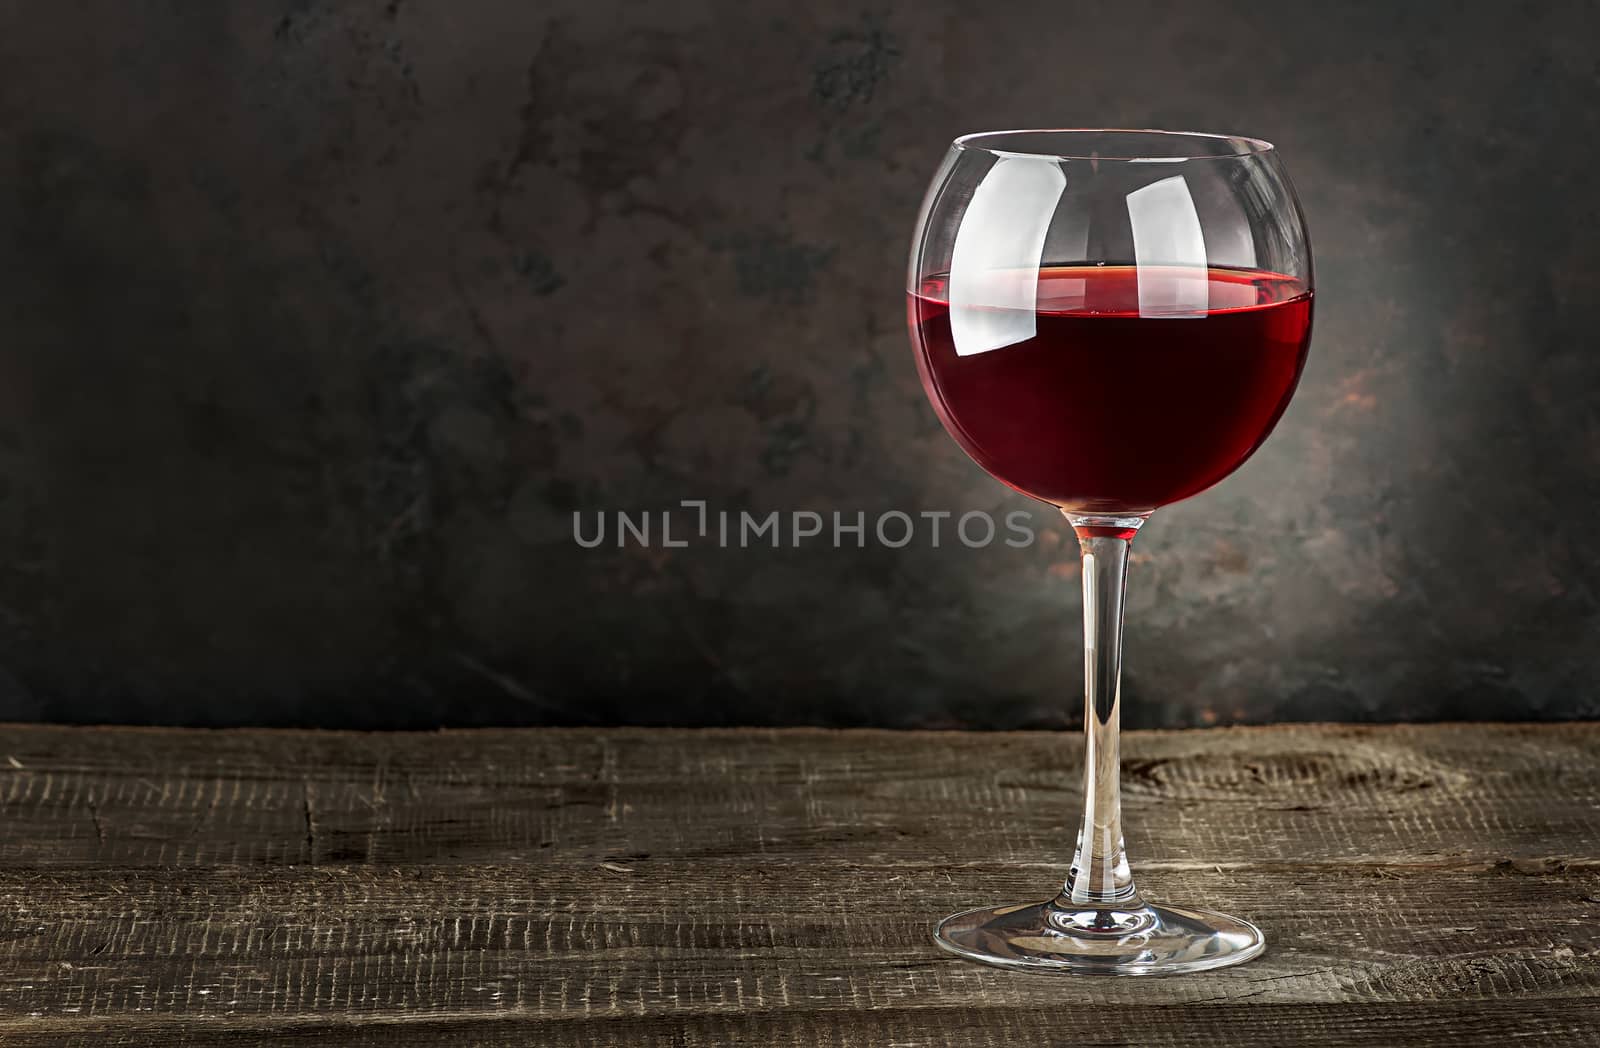 Glass of red wine on a wooden table. Dark blurry background.